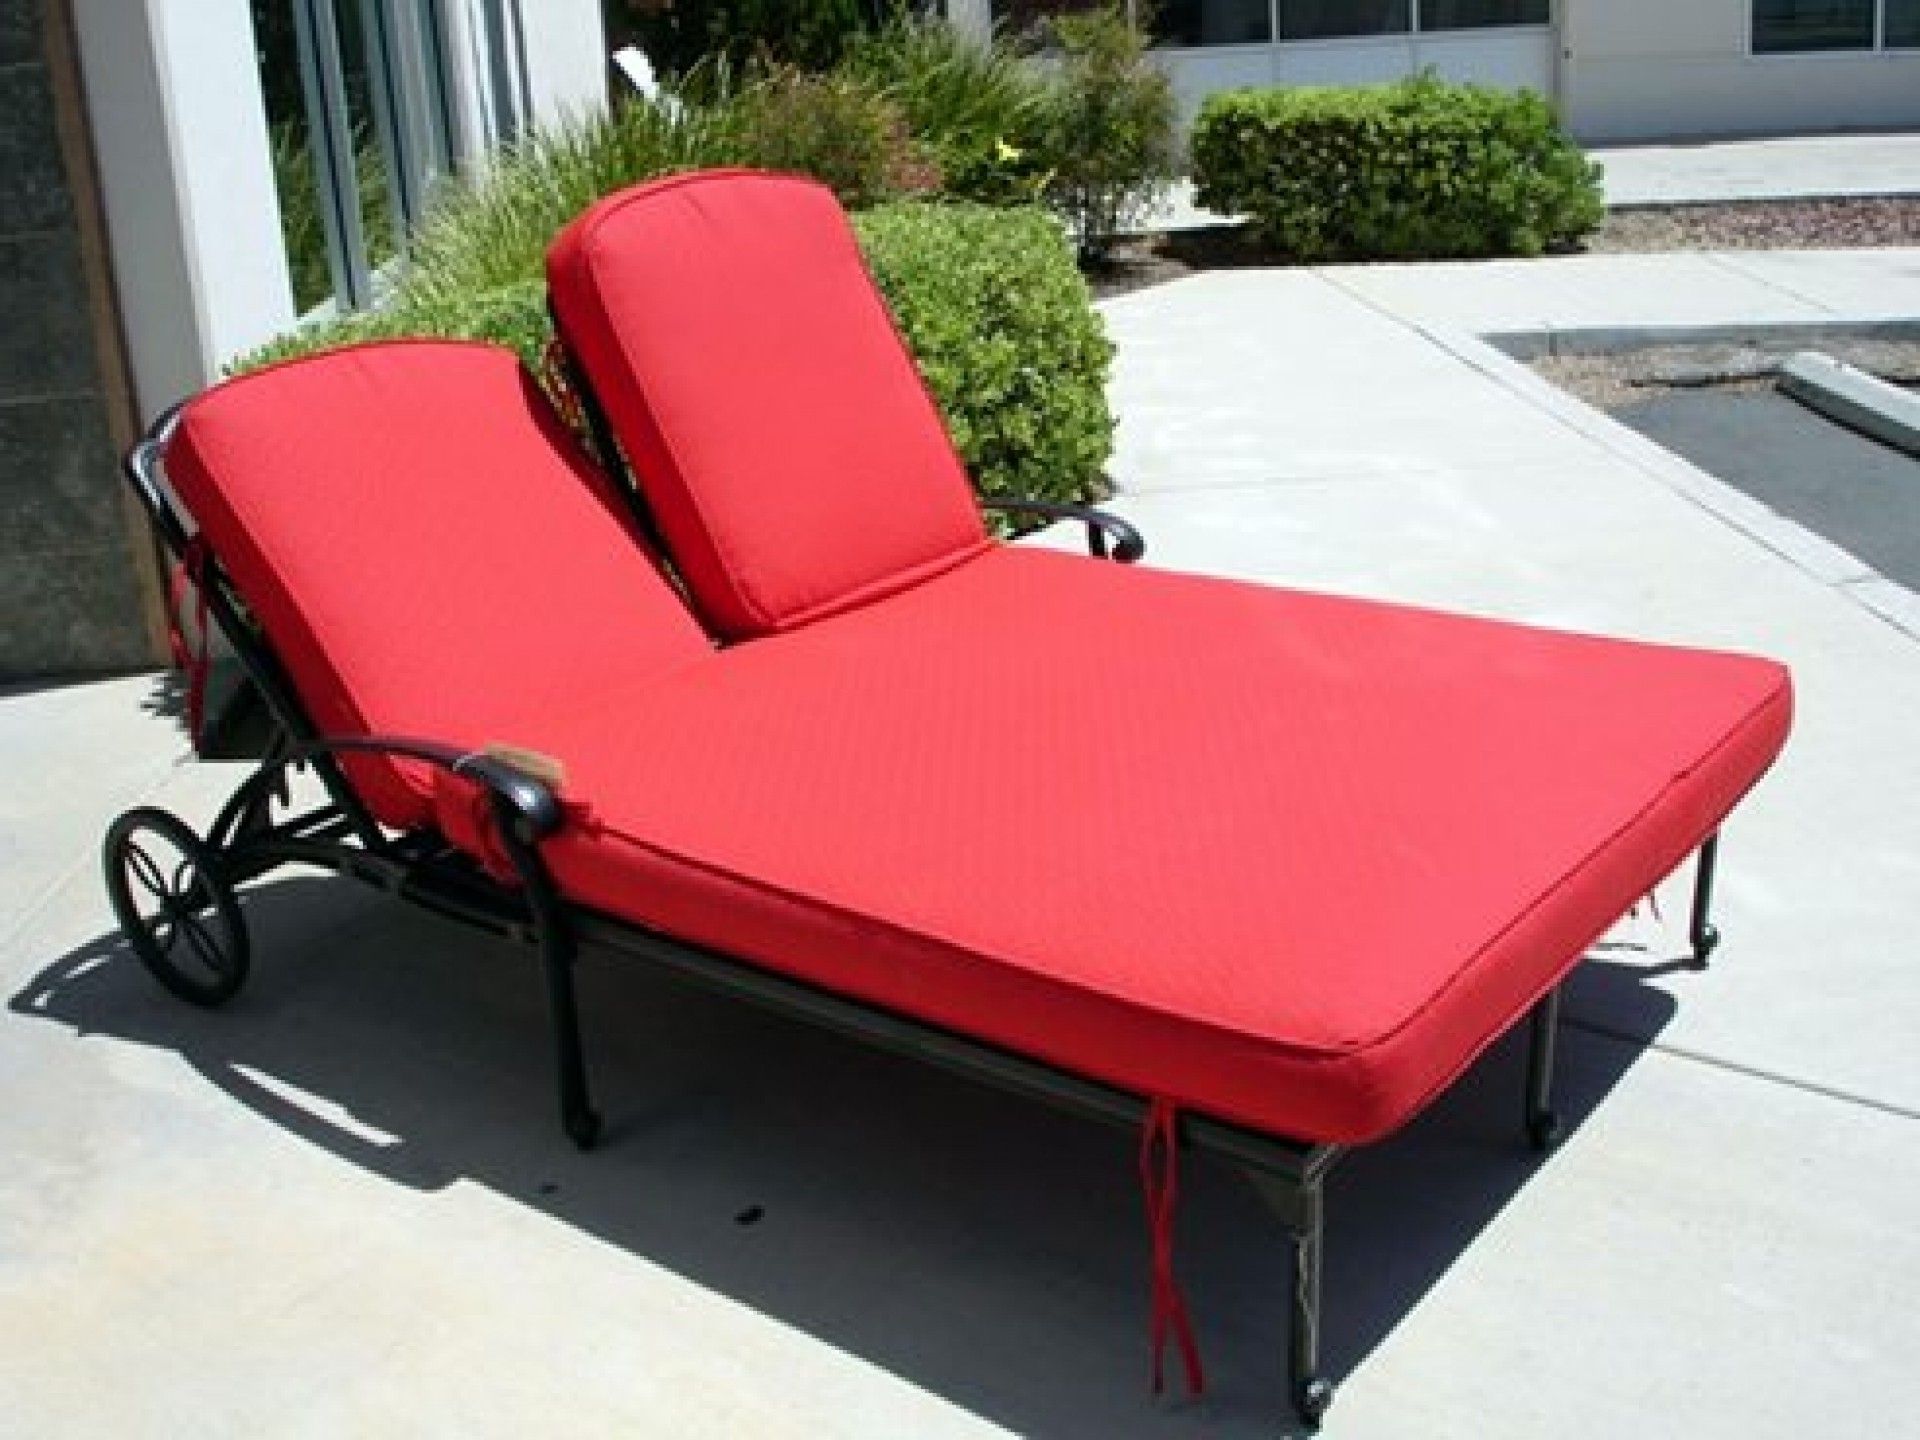 2017 Cushion Pads For Outdoor Chaise Lounge Chairs Pertaining To Convertible Chair : For Outside Furniture Chaise Lounge Chair Pads (View 4 of 15)